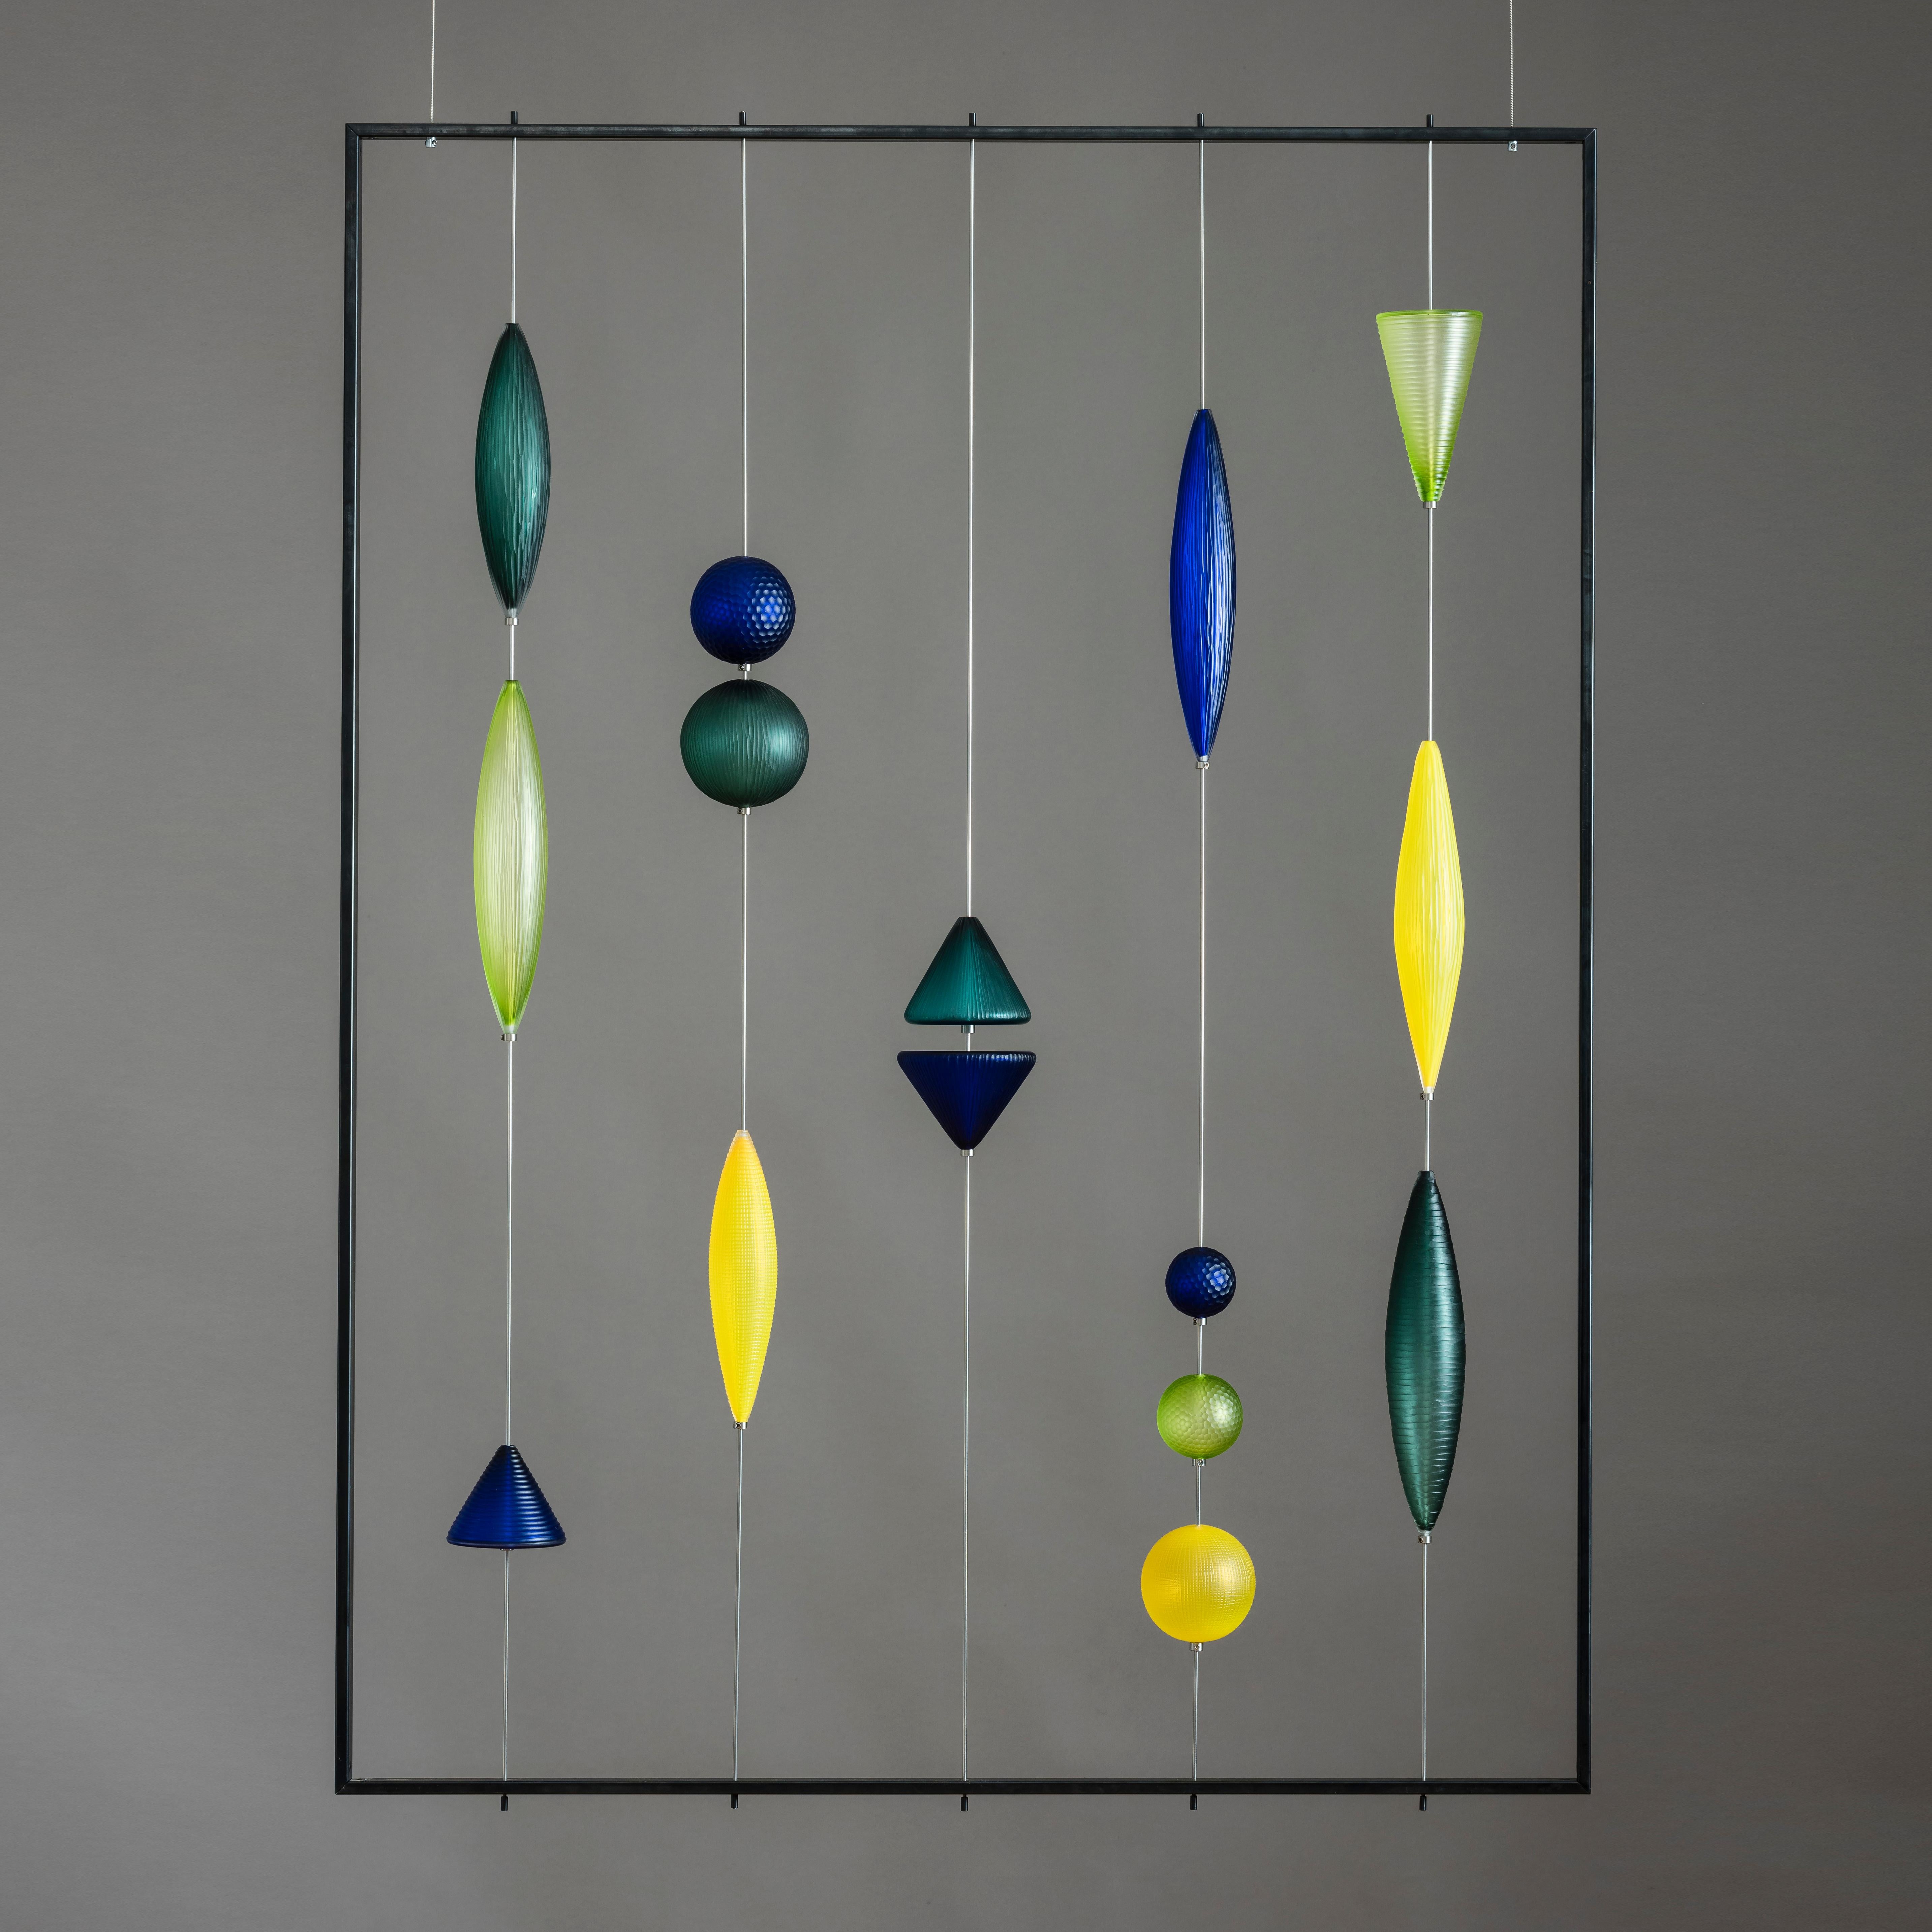 A Tropical Memory is a unique hanging glass with steel frame sculpture in yellow, blue, green and jade by Philip Baldwin & Monica Guggisberg. Scandinavian and Venetian glassmaking techniques come together in their artworks to create beautiful